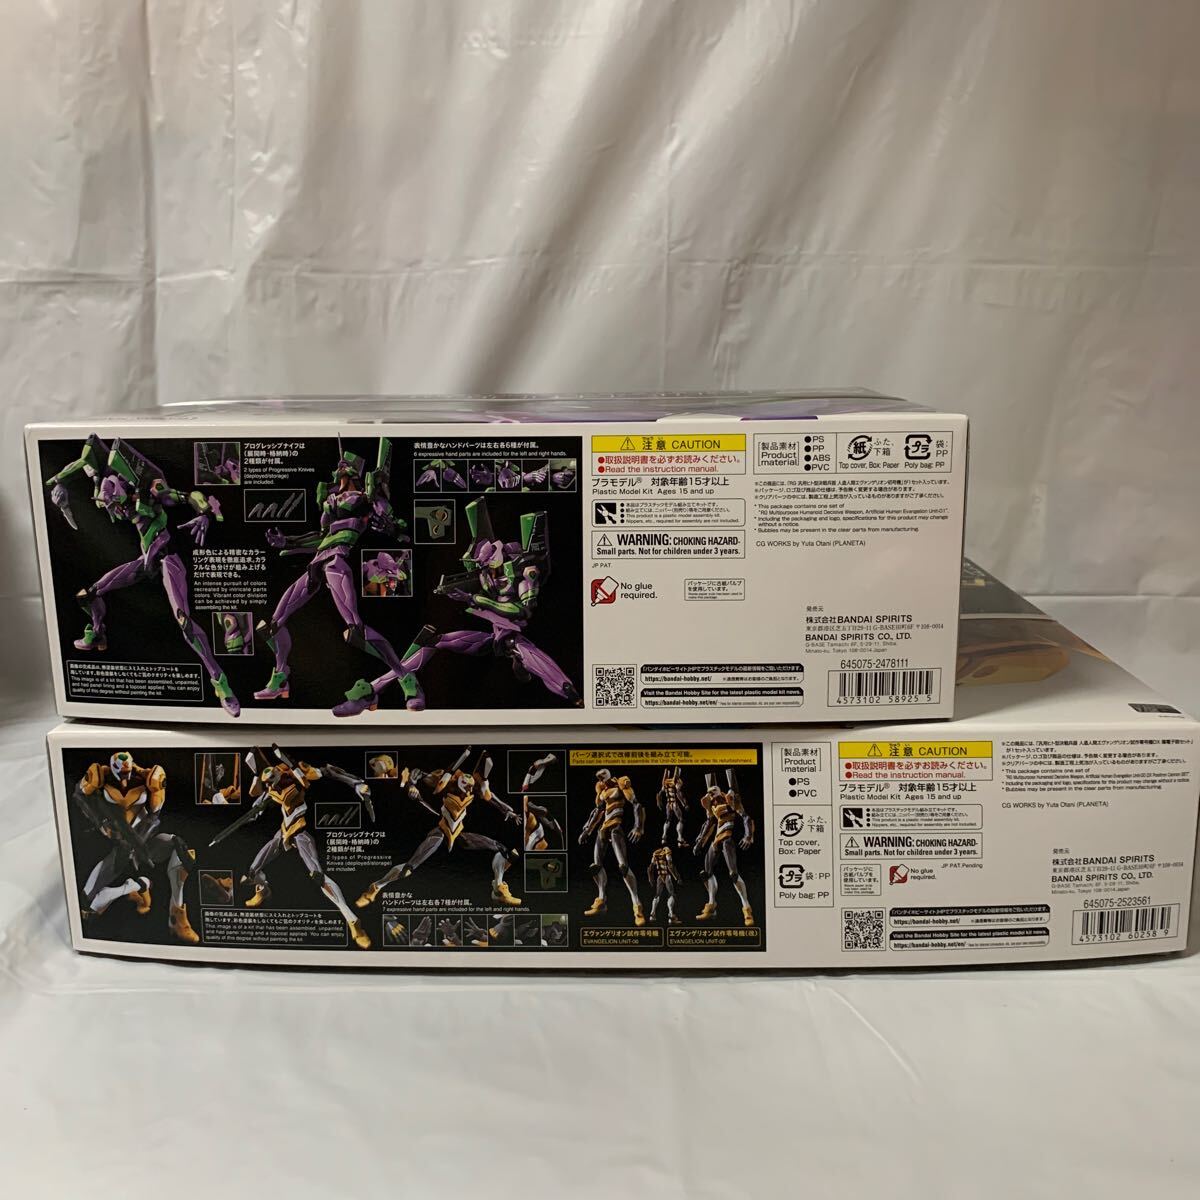 RG all-purpose hito type decision war . vessel Evangelion Unit-01 all-purpose hito type decision war . vessel Evangelion . work 0 serial number DX. electron . set 2 box new goods unopened not yet constructed 